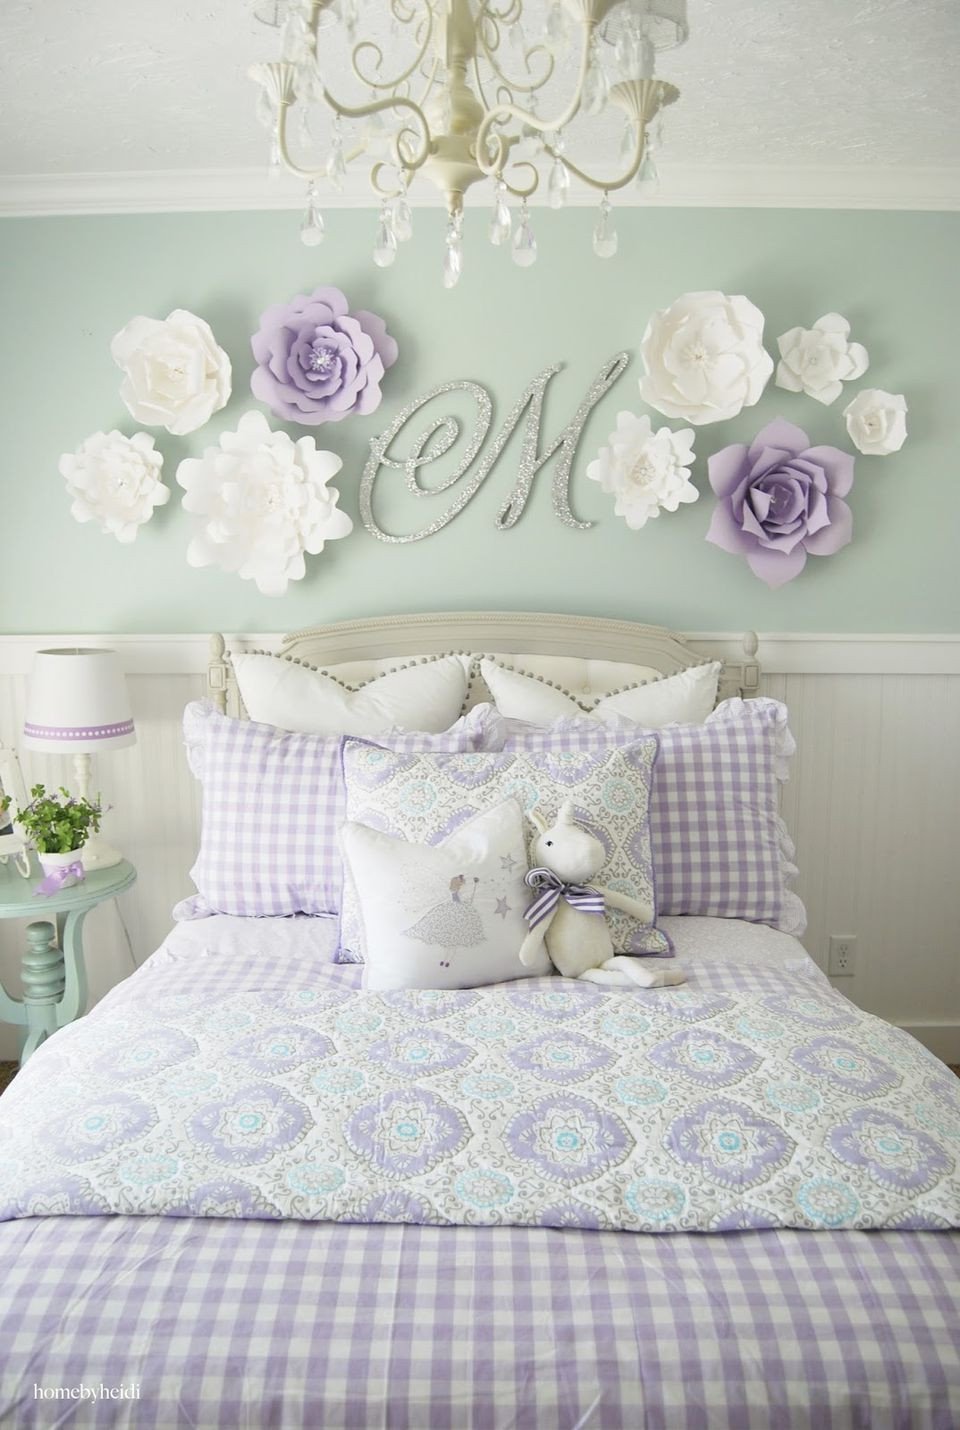 Rooms to Go Wall Decor Elegant 24 Wall Decor Ideas for Girls Rooms